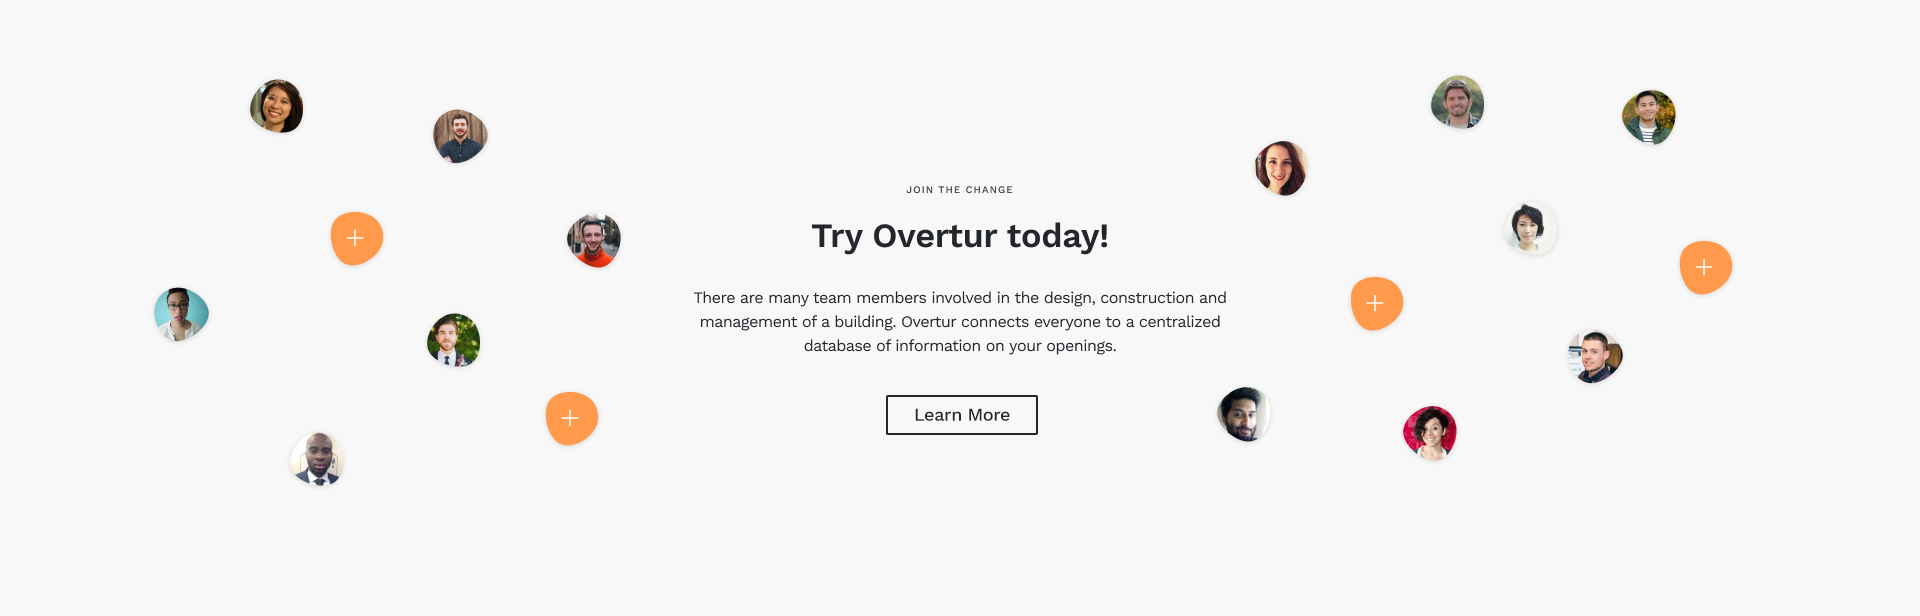 Try overtur today